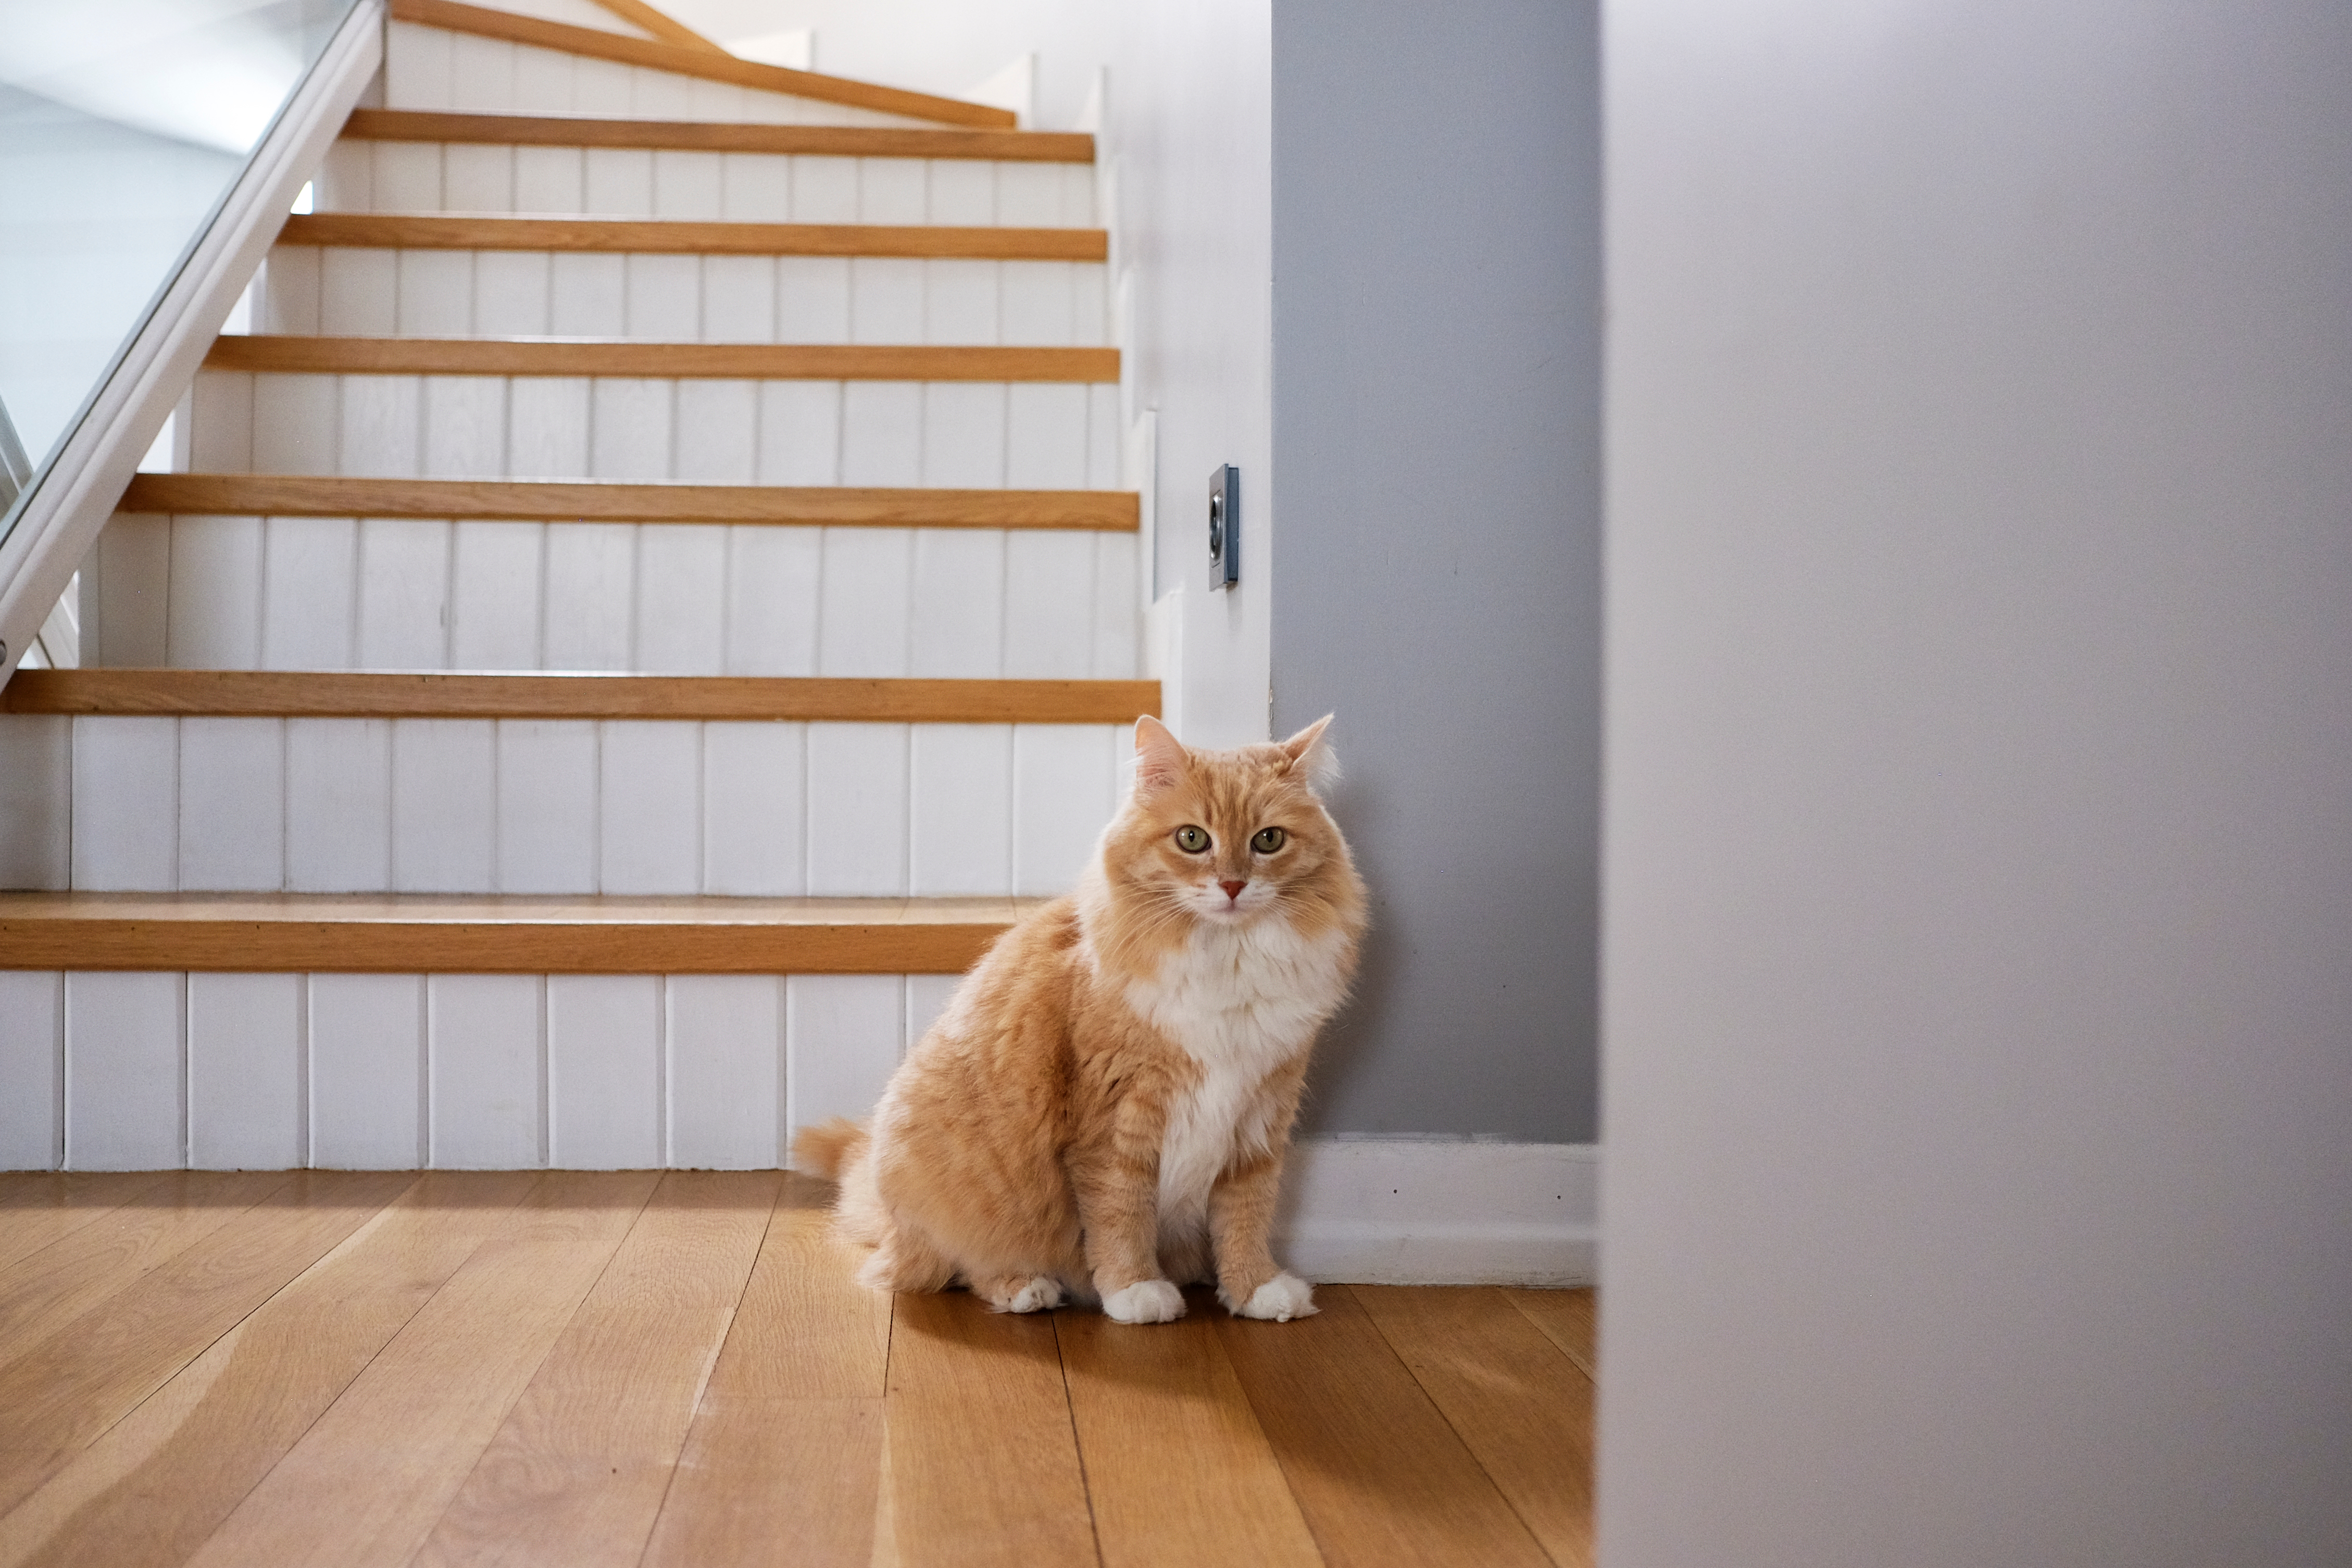 cats in pain may stop using stairs